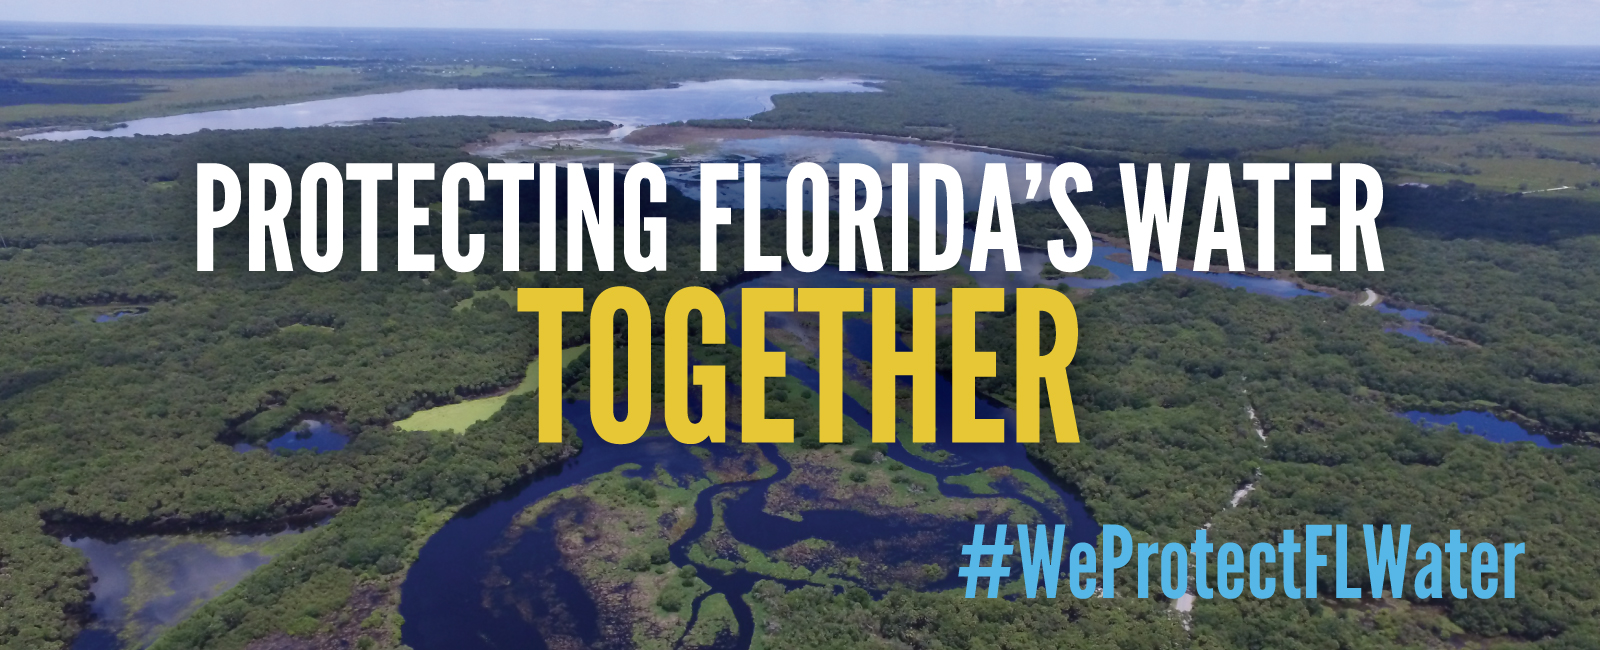 Protecting Florida's Water Together